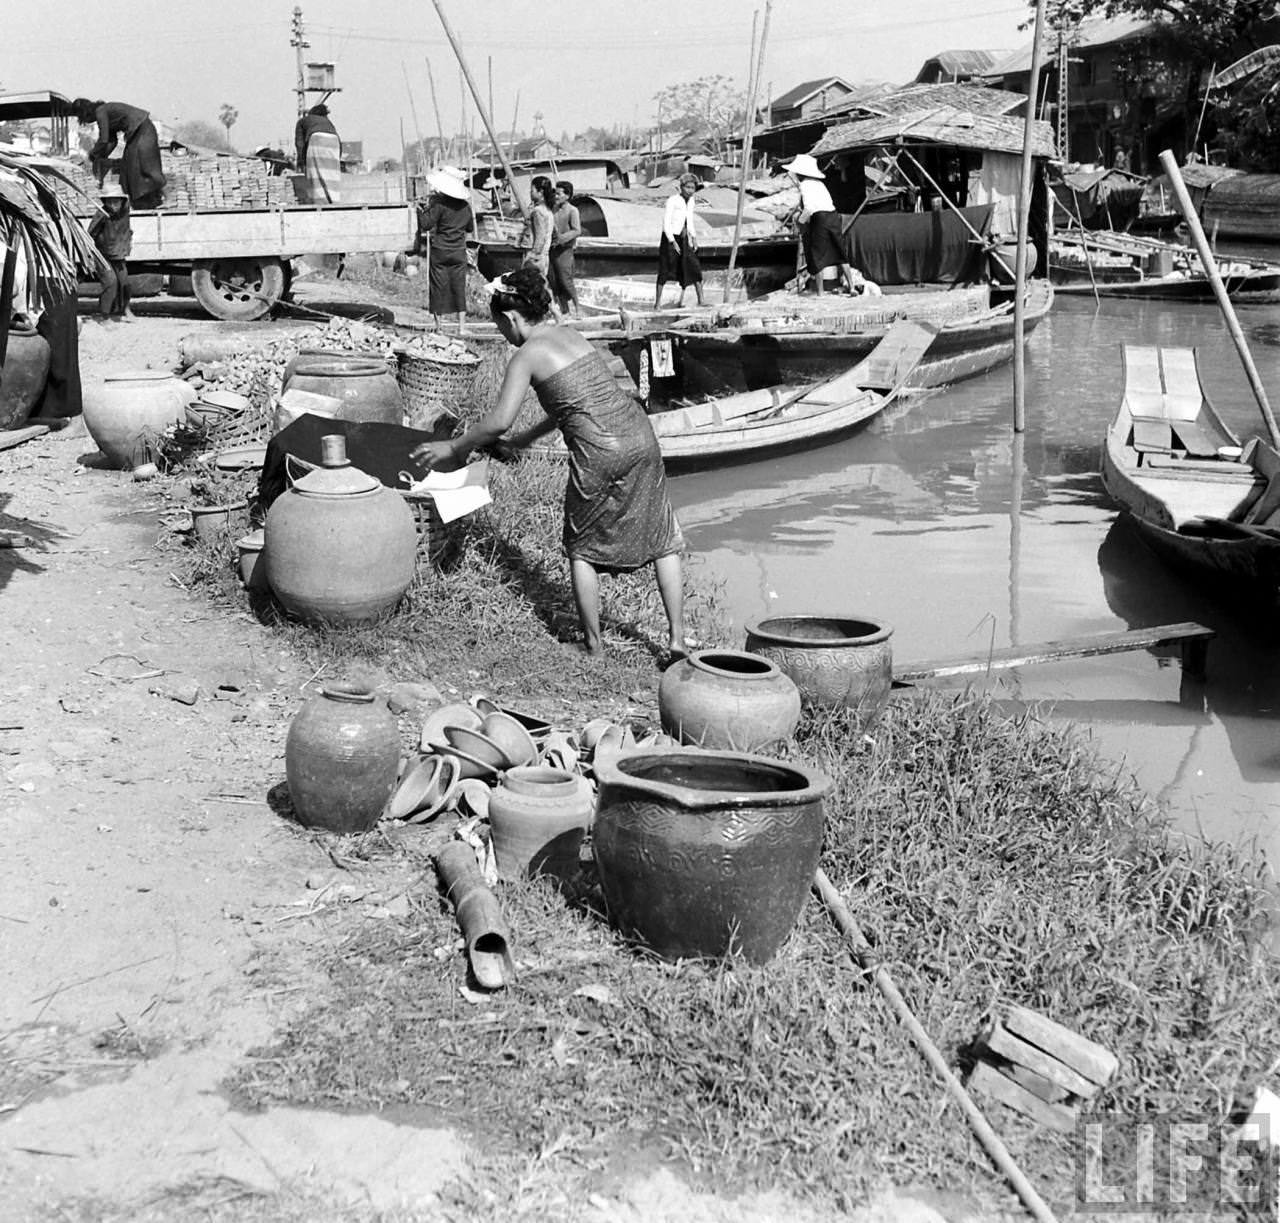 Fascinating Vintage Photos of Life on Bangkok's Chao Phraya River in the 1950s